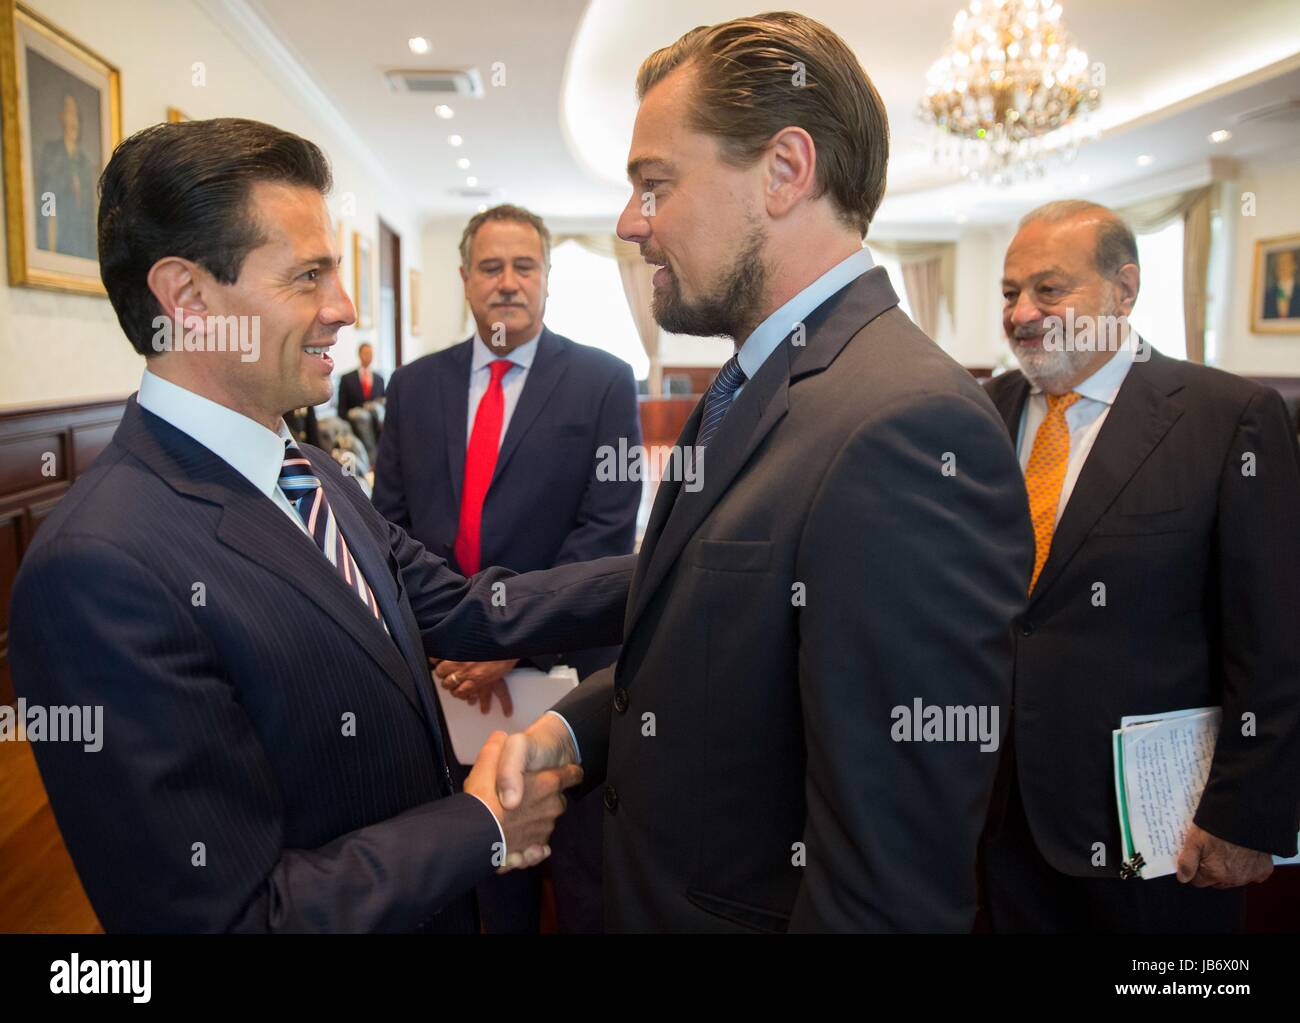 Mexico City, Mexico. 08th June, 2017. Mexican President Enrique Pena Nieto, left, greets actor Leonardo DiCaprio as Mexican billionaire Carlos Slim, right, looks on during a meeting to discuss saving the Vaquita, a critically endangered porpoise native to Mexico's Gulf of California, at the presidential palace Los Pinos June 8, 2017 in Mexico City, Mexico. DiCaprio is joining forces with Pena Nieto and Slim to try and save the Vaquita from extinction. (photo by Presidenciamx via Planetpix) Stock Photo